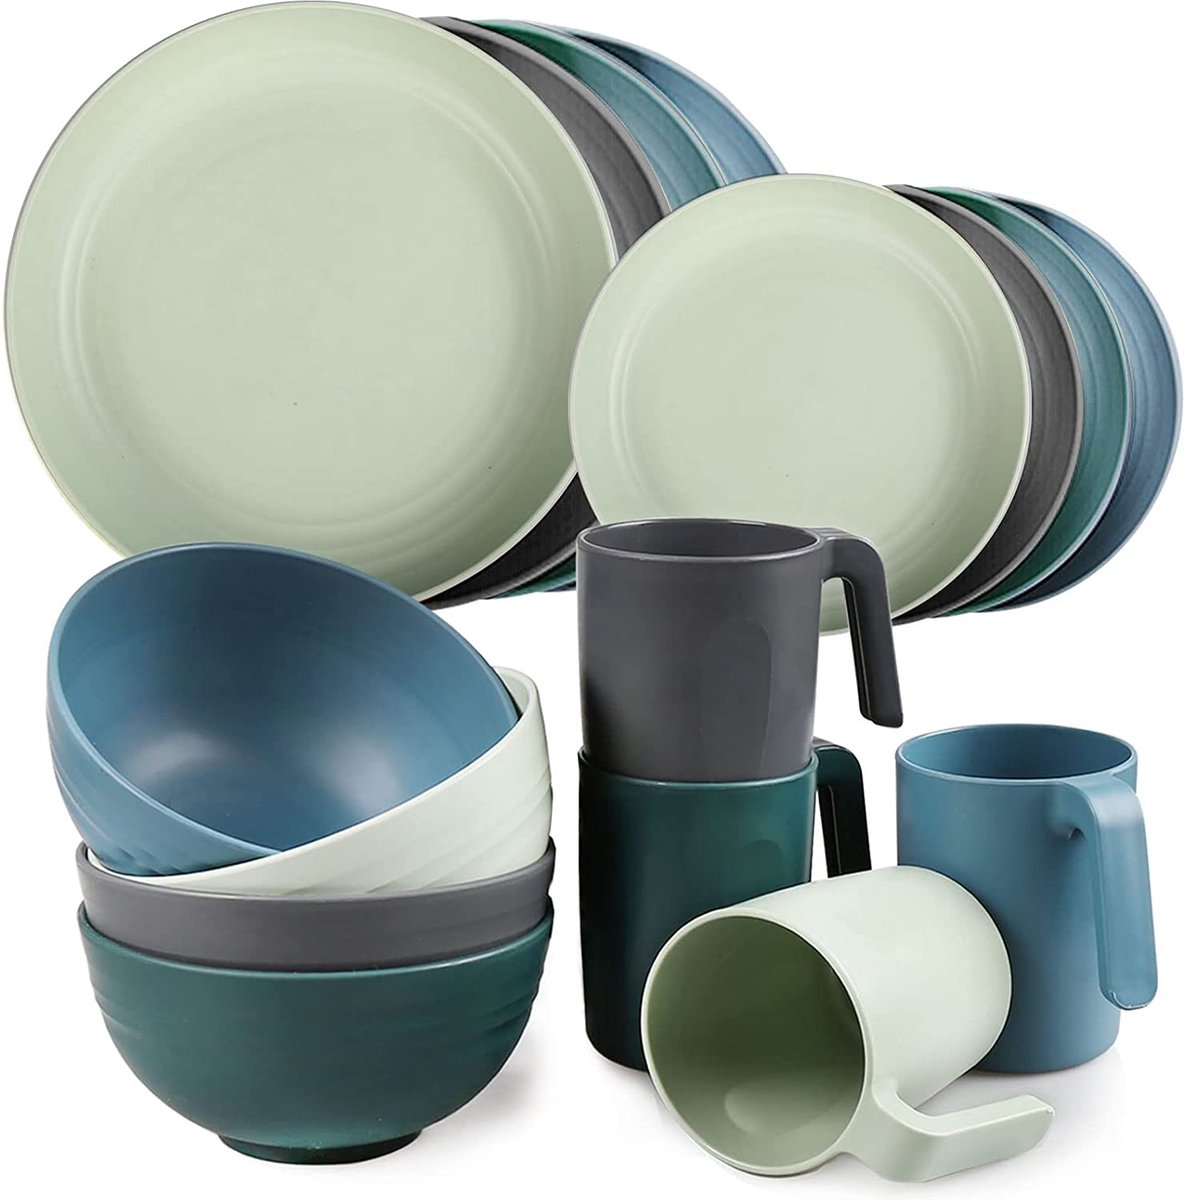 Greentainer Unbreakable Plastic Dinnerware Set, Lightweight Tableware with 4 Dinning Plates, 4 Dessert Plates, 4 Bowls, 4 Cups Kids & Adults, Service for 4, Dishwasher&Microwave Safe,16 Pcs